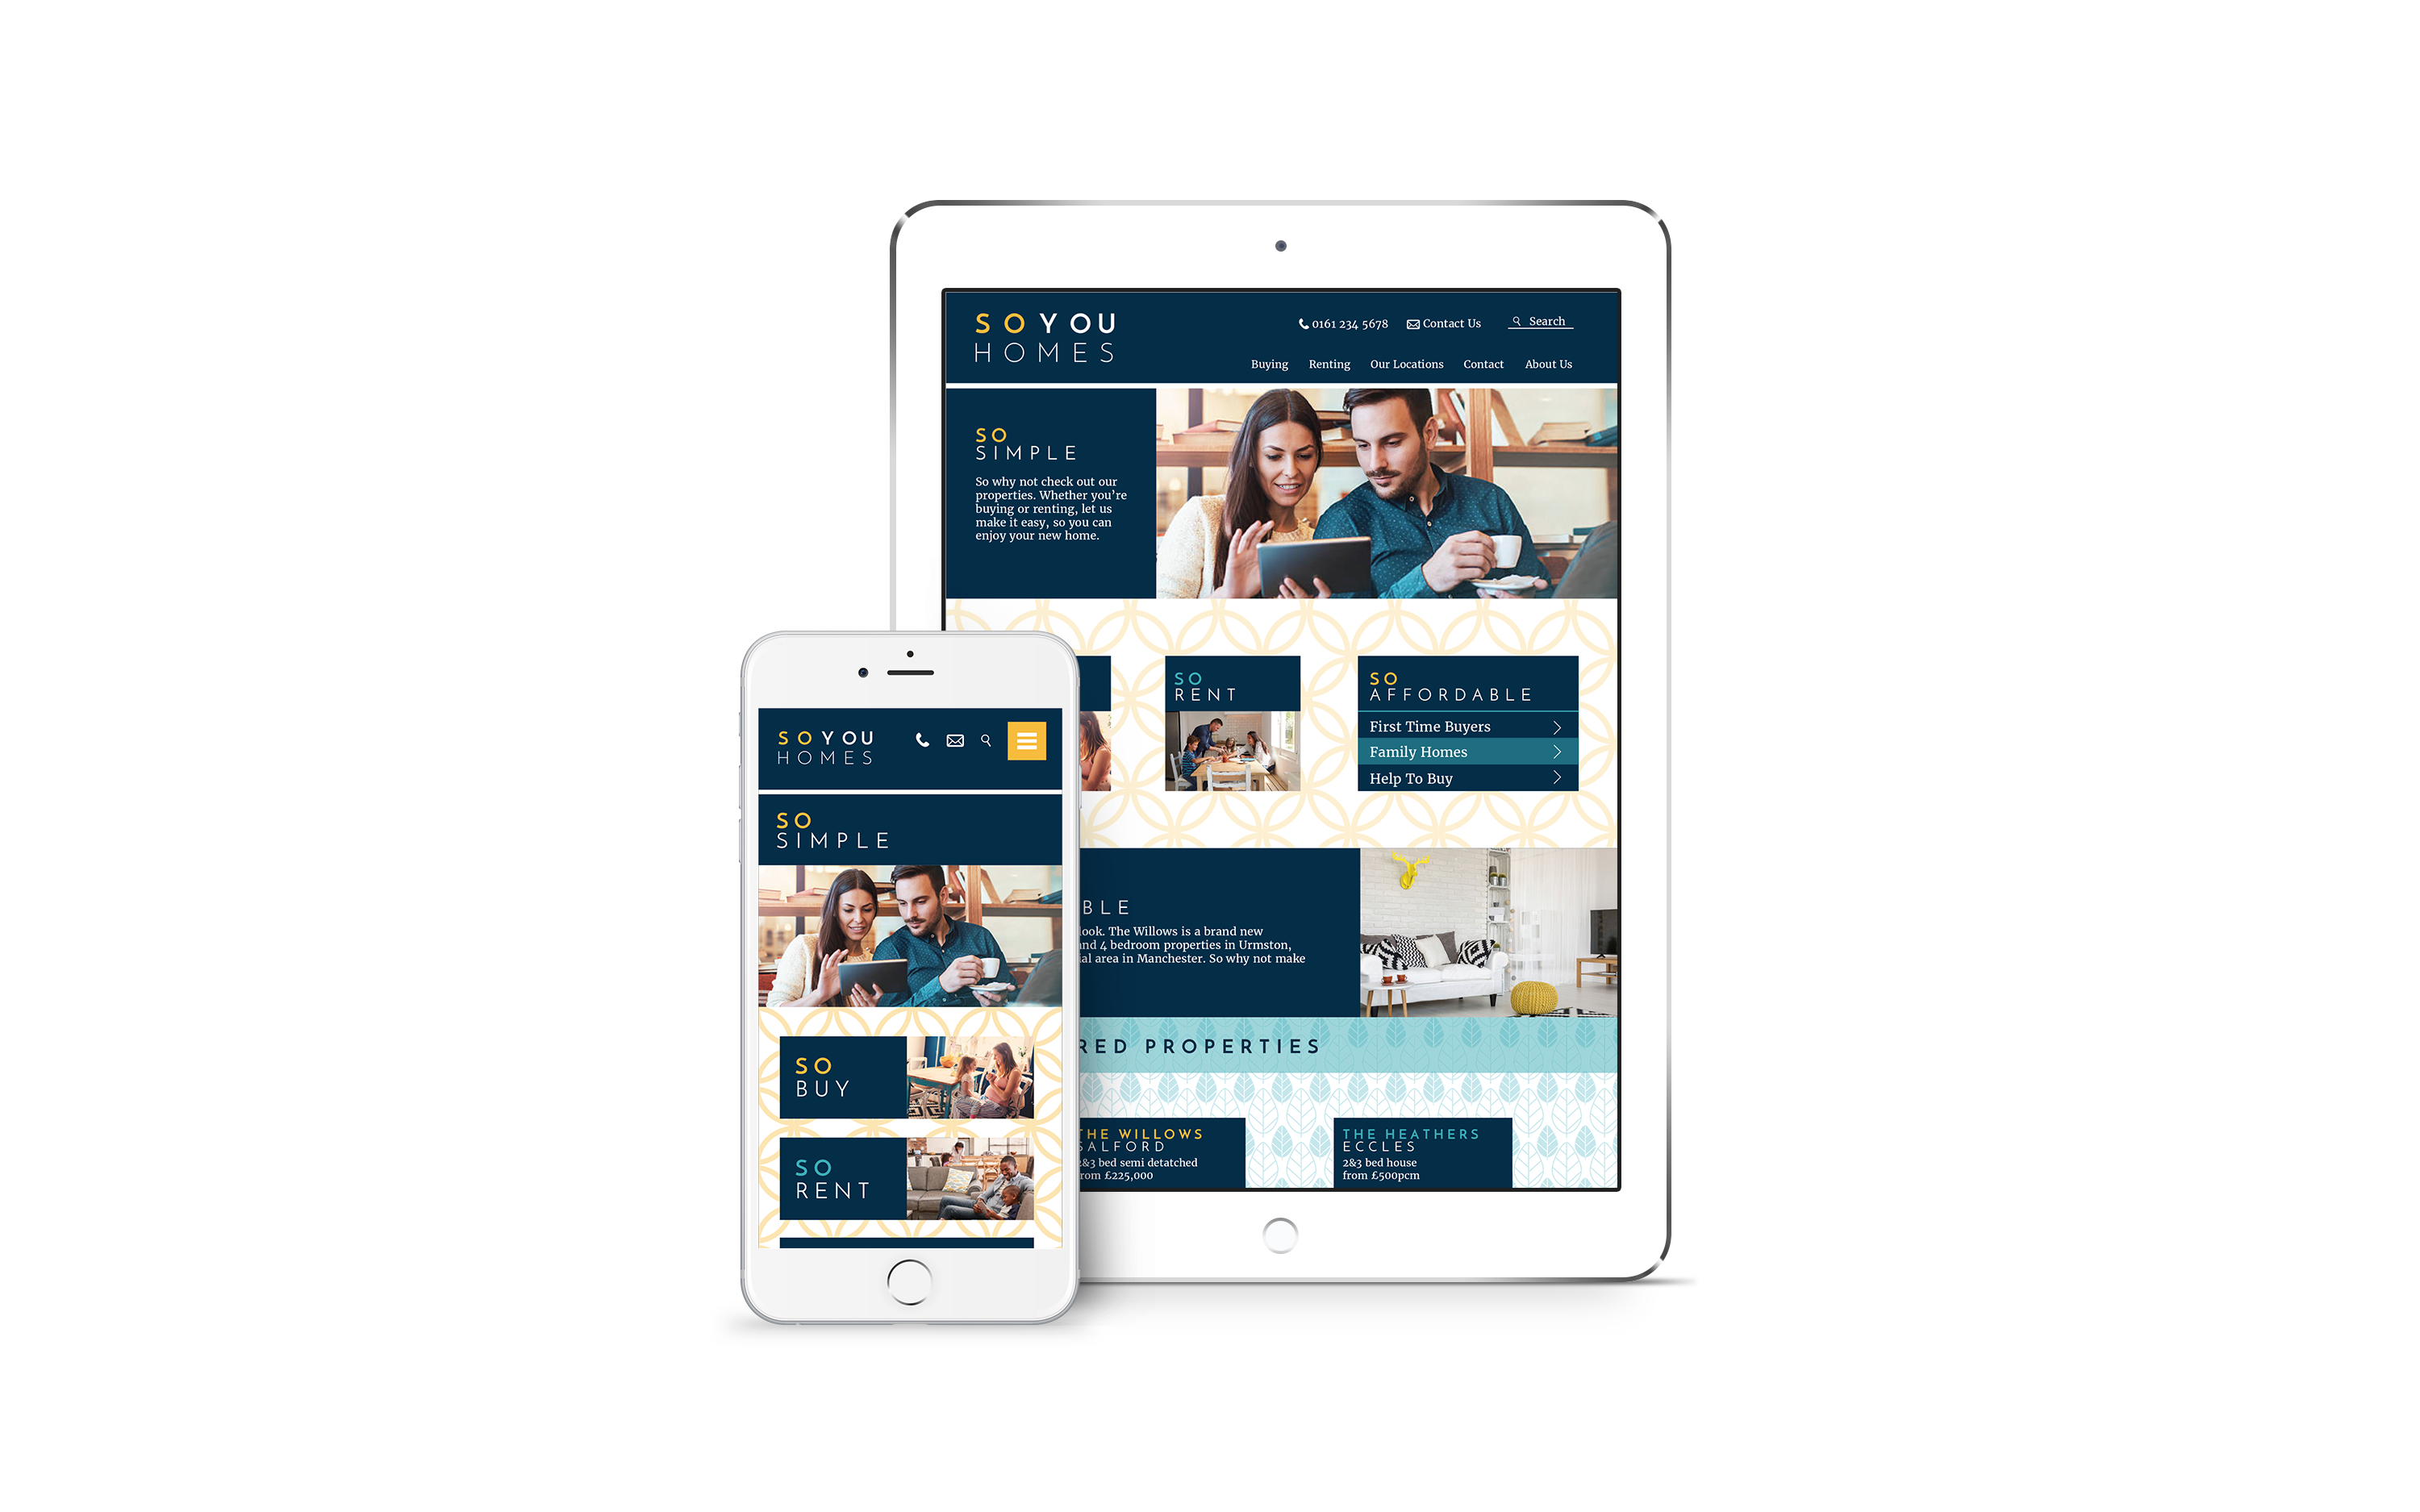 So You Homes website homepage shown on tablet and iphone